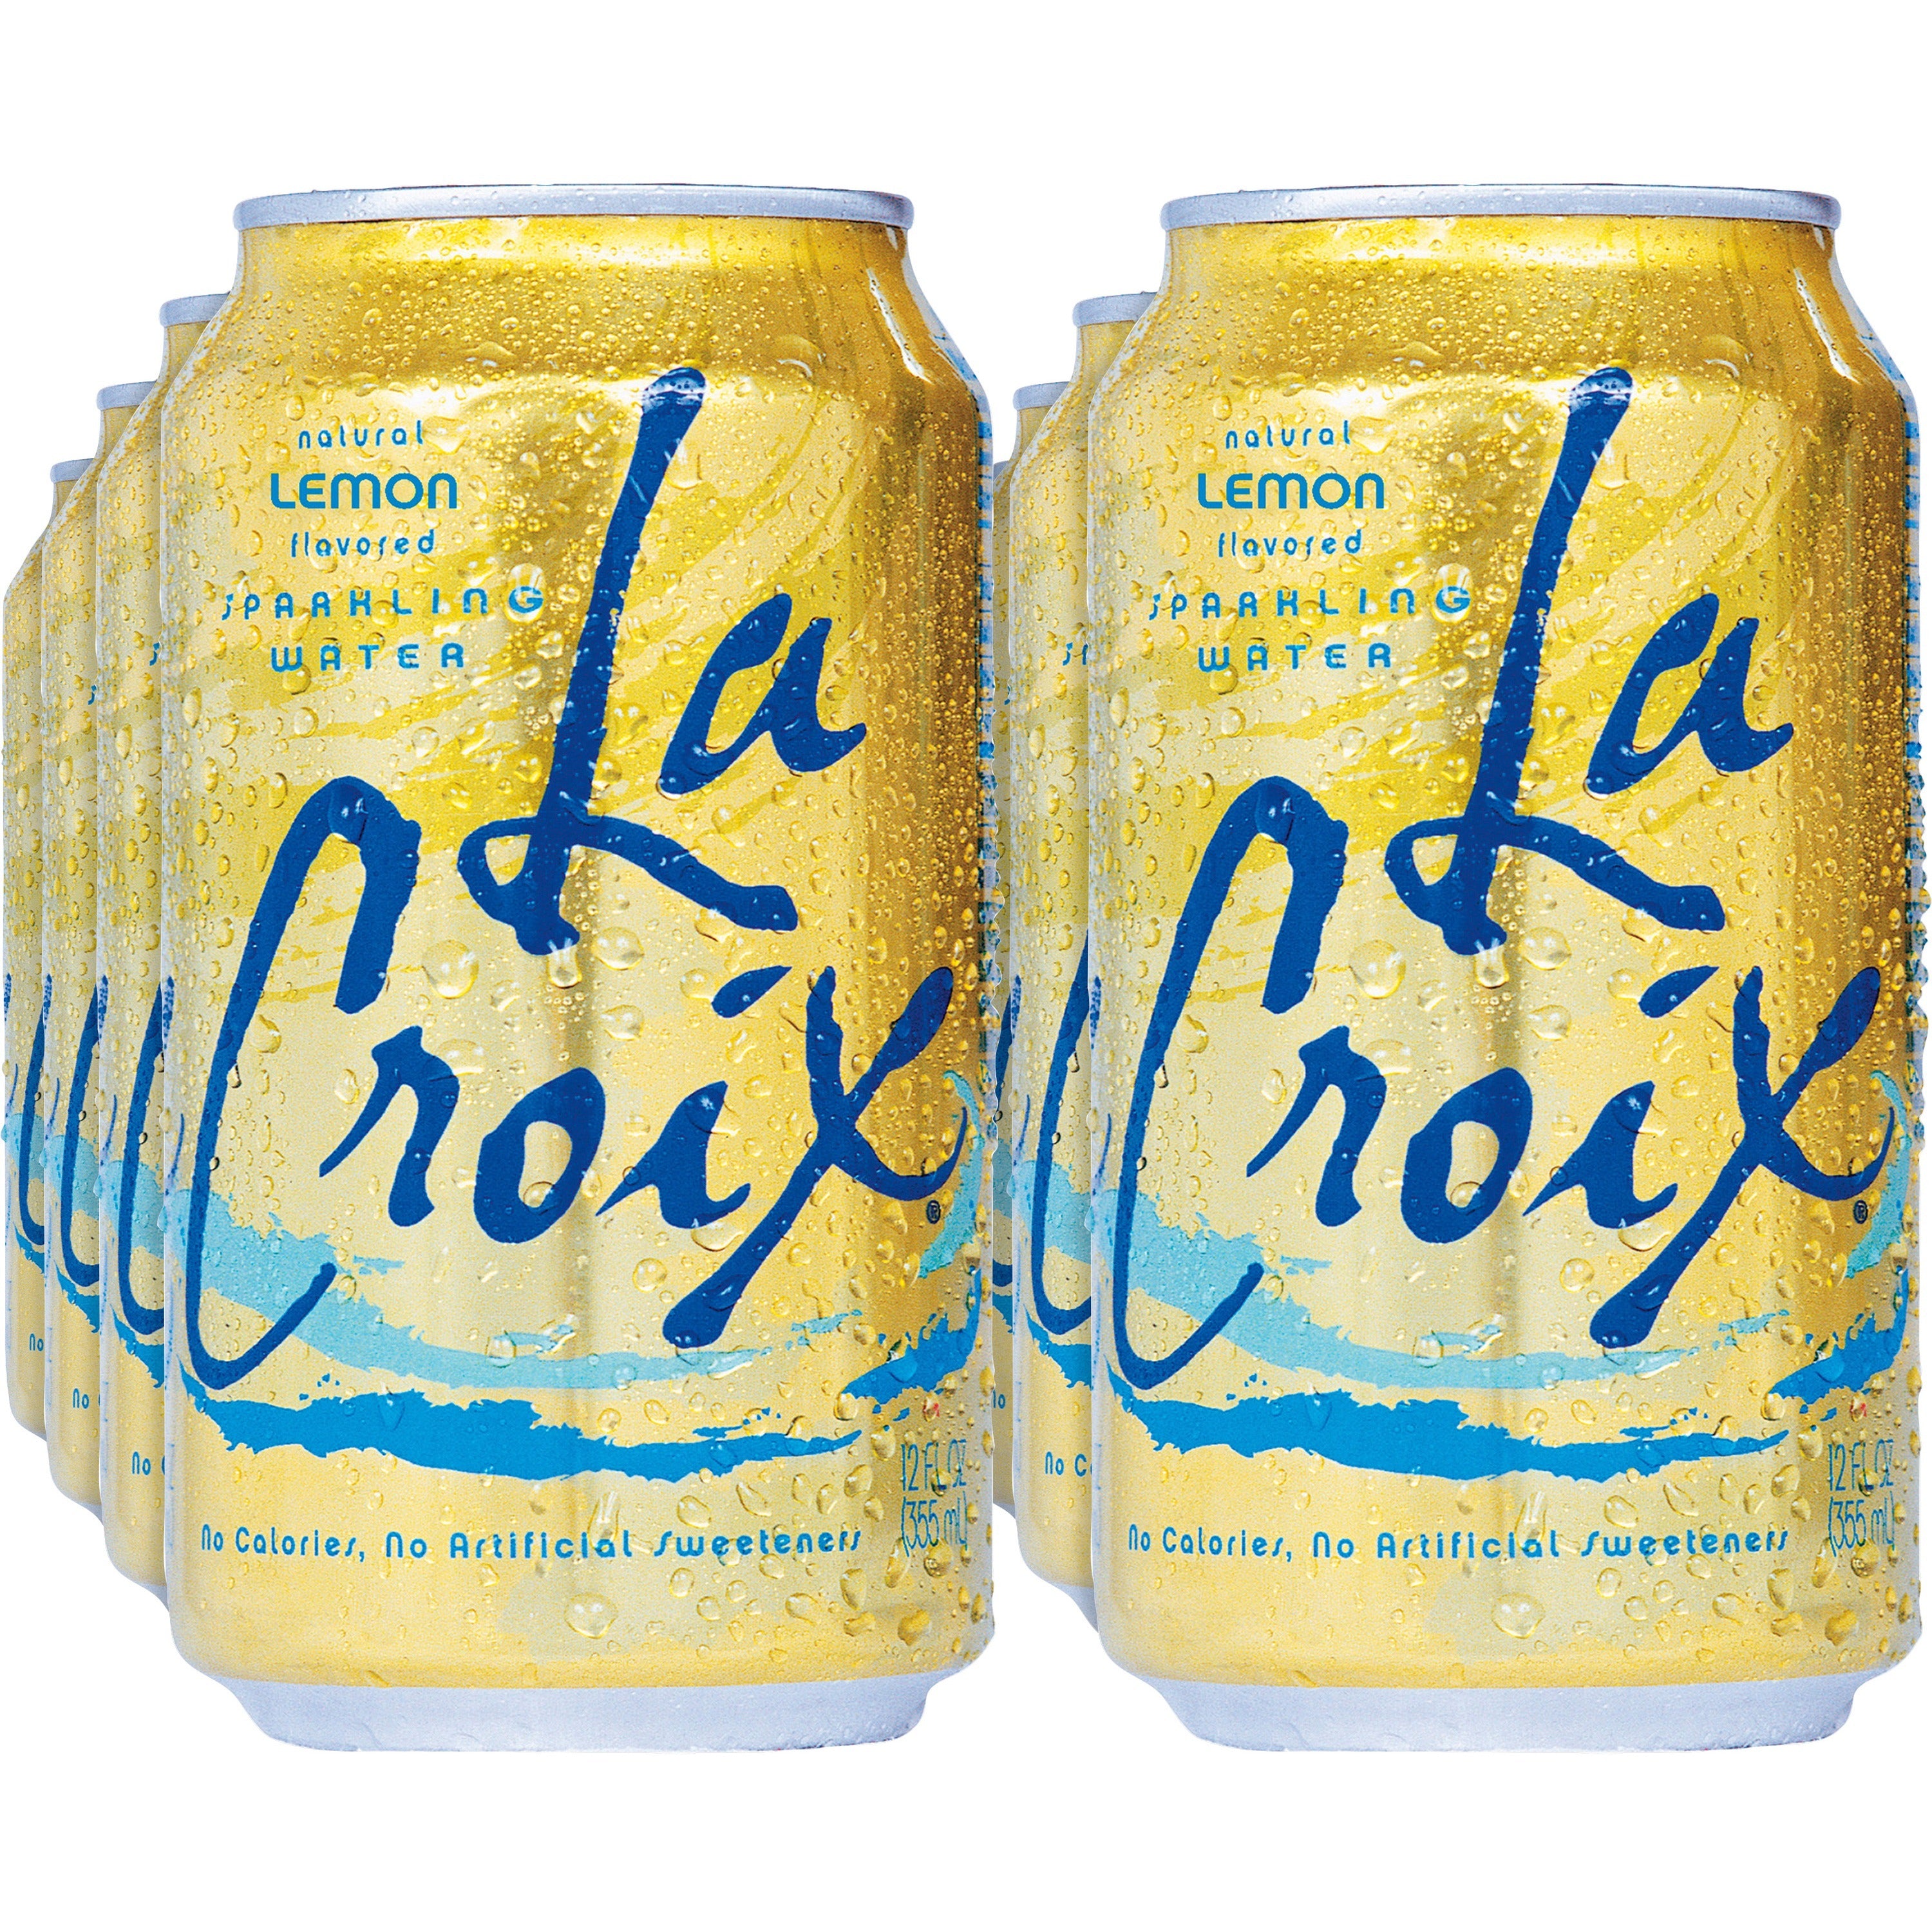 lacroix-flavored-sparkling-water-ready-to-drink-lemon-flavor-12-fl-oz-355-ml-24-carton-can_lcx40130 - 1